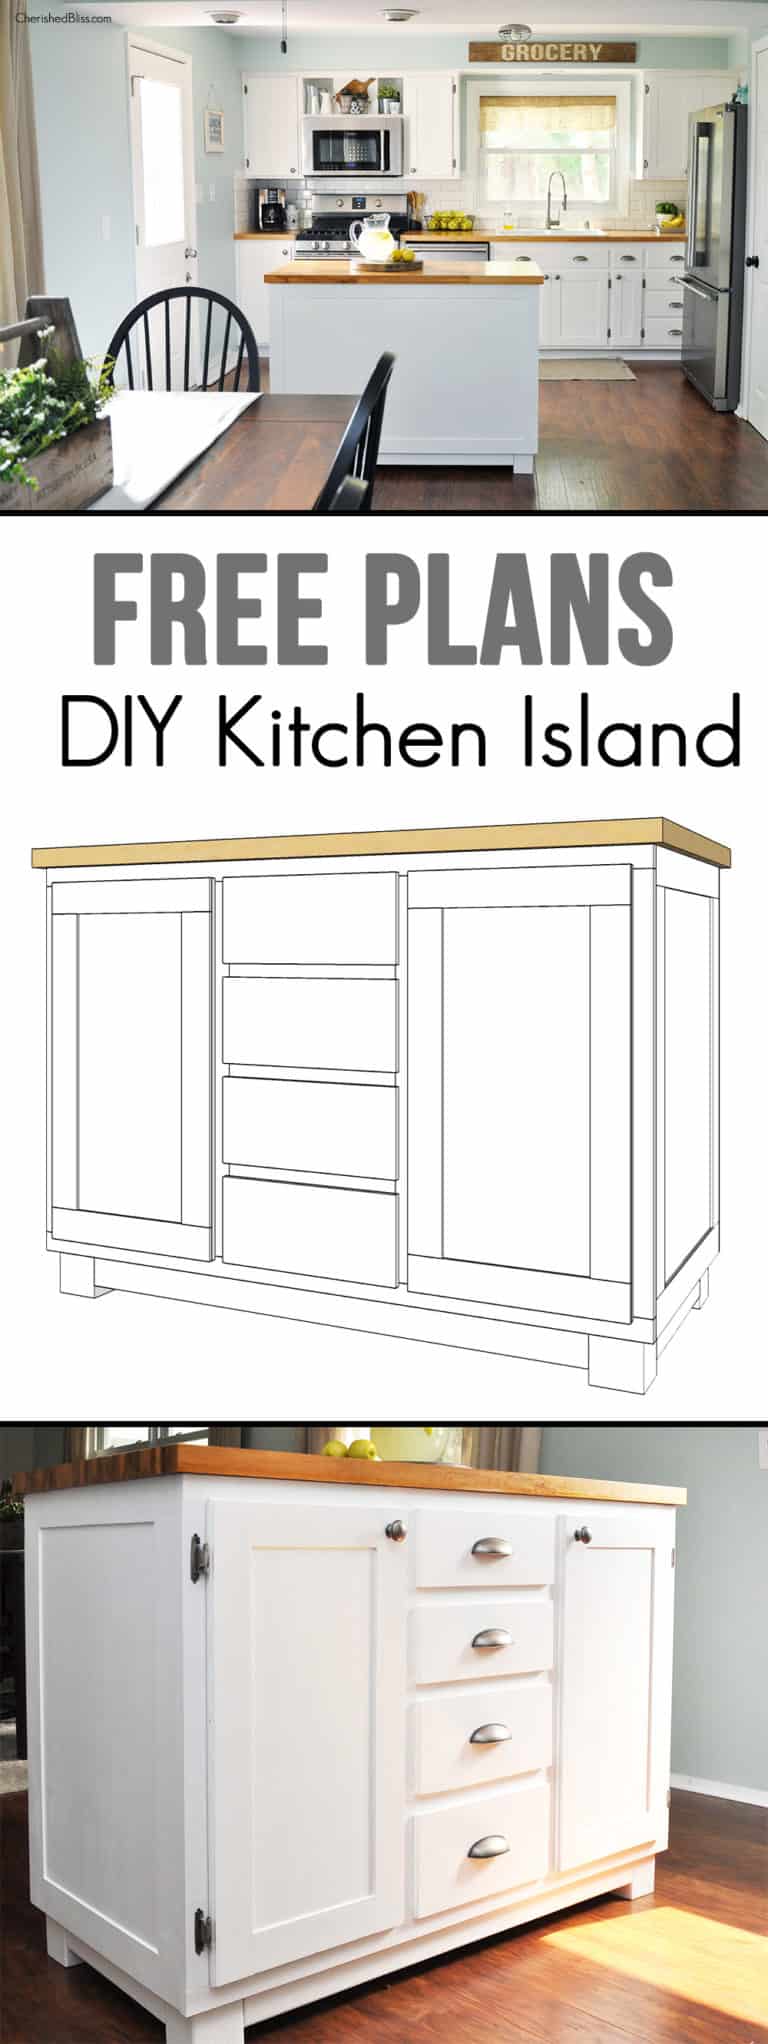 Free plans for an island with drawers and cupboards